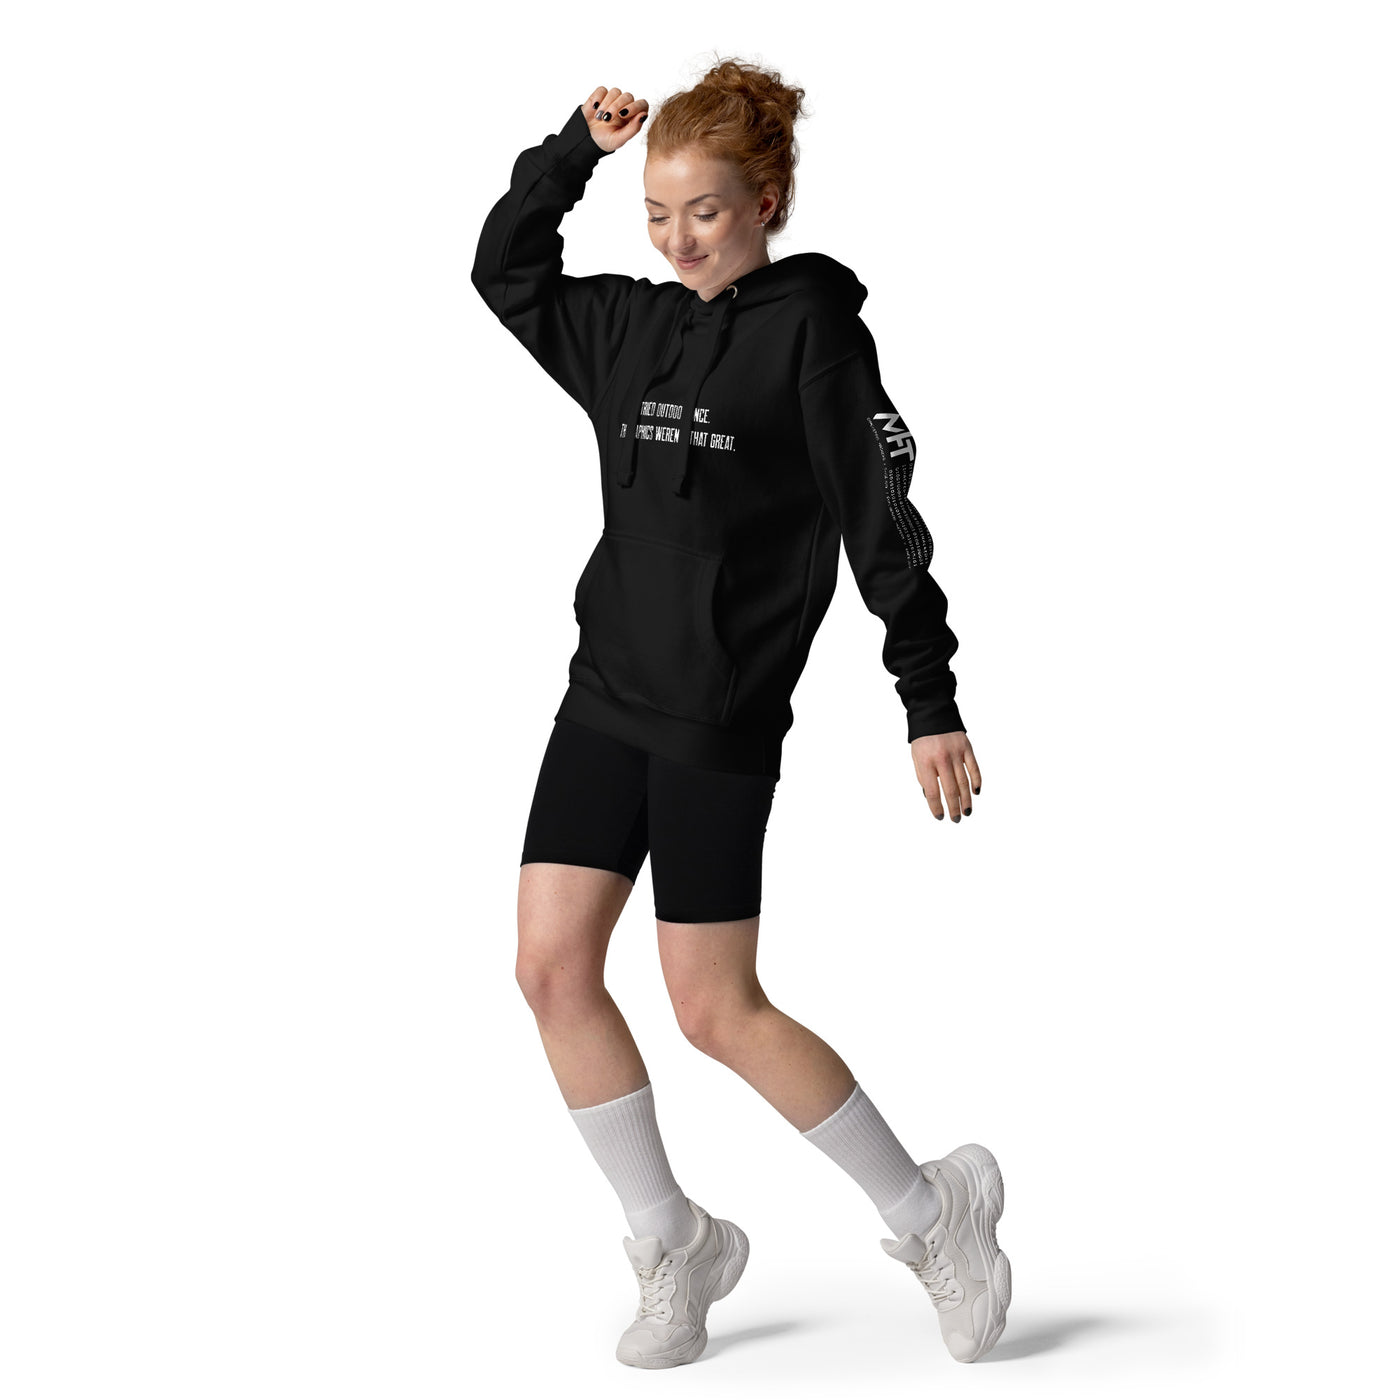 I Tried outdoor once, but the Graphics Weren't that good V2 - Unisex Hoodie